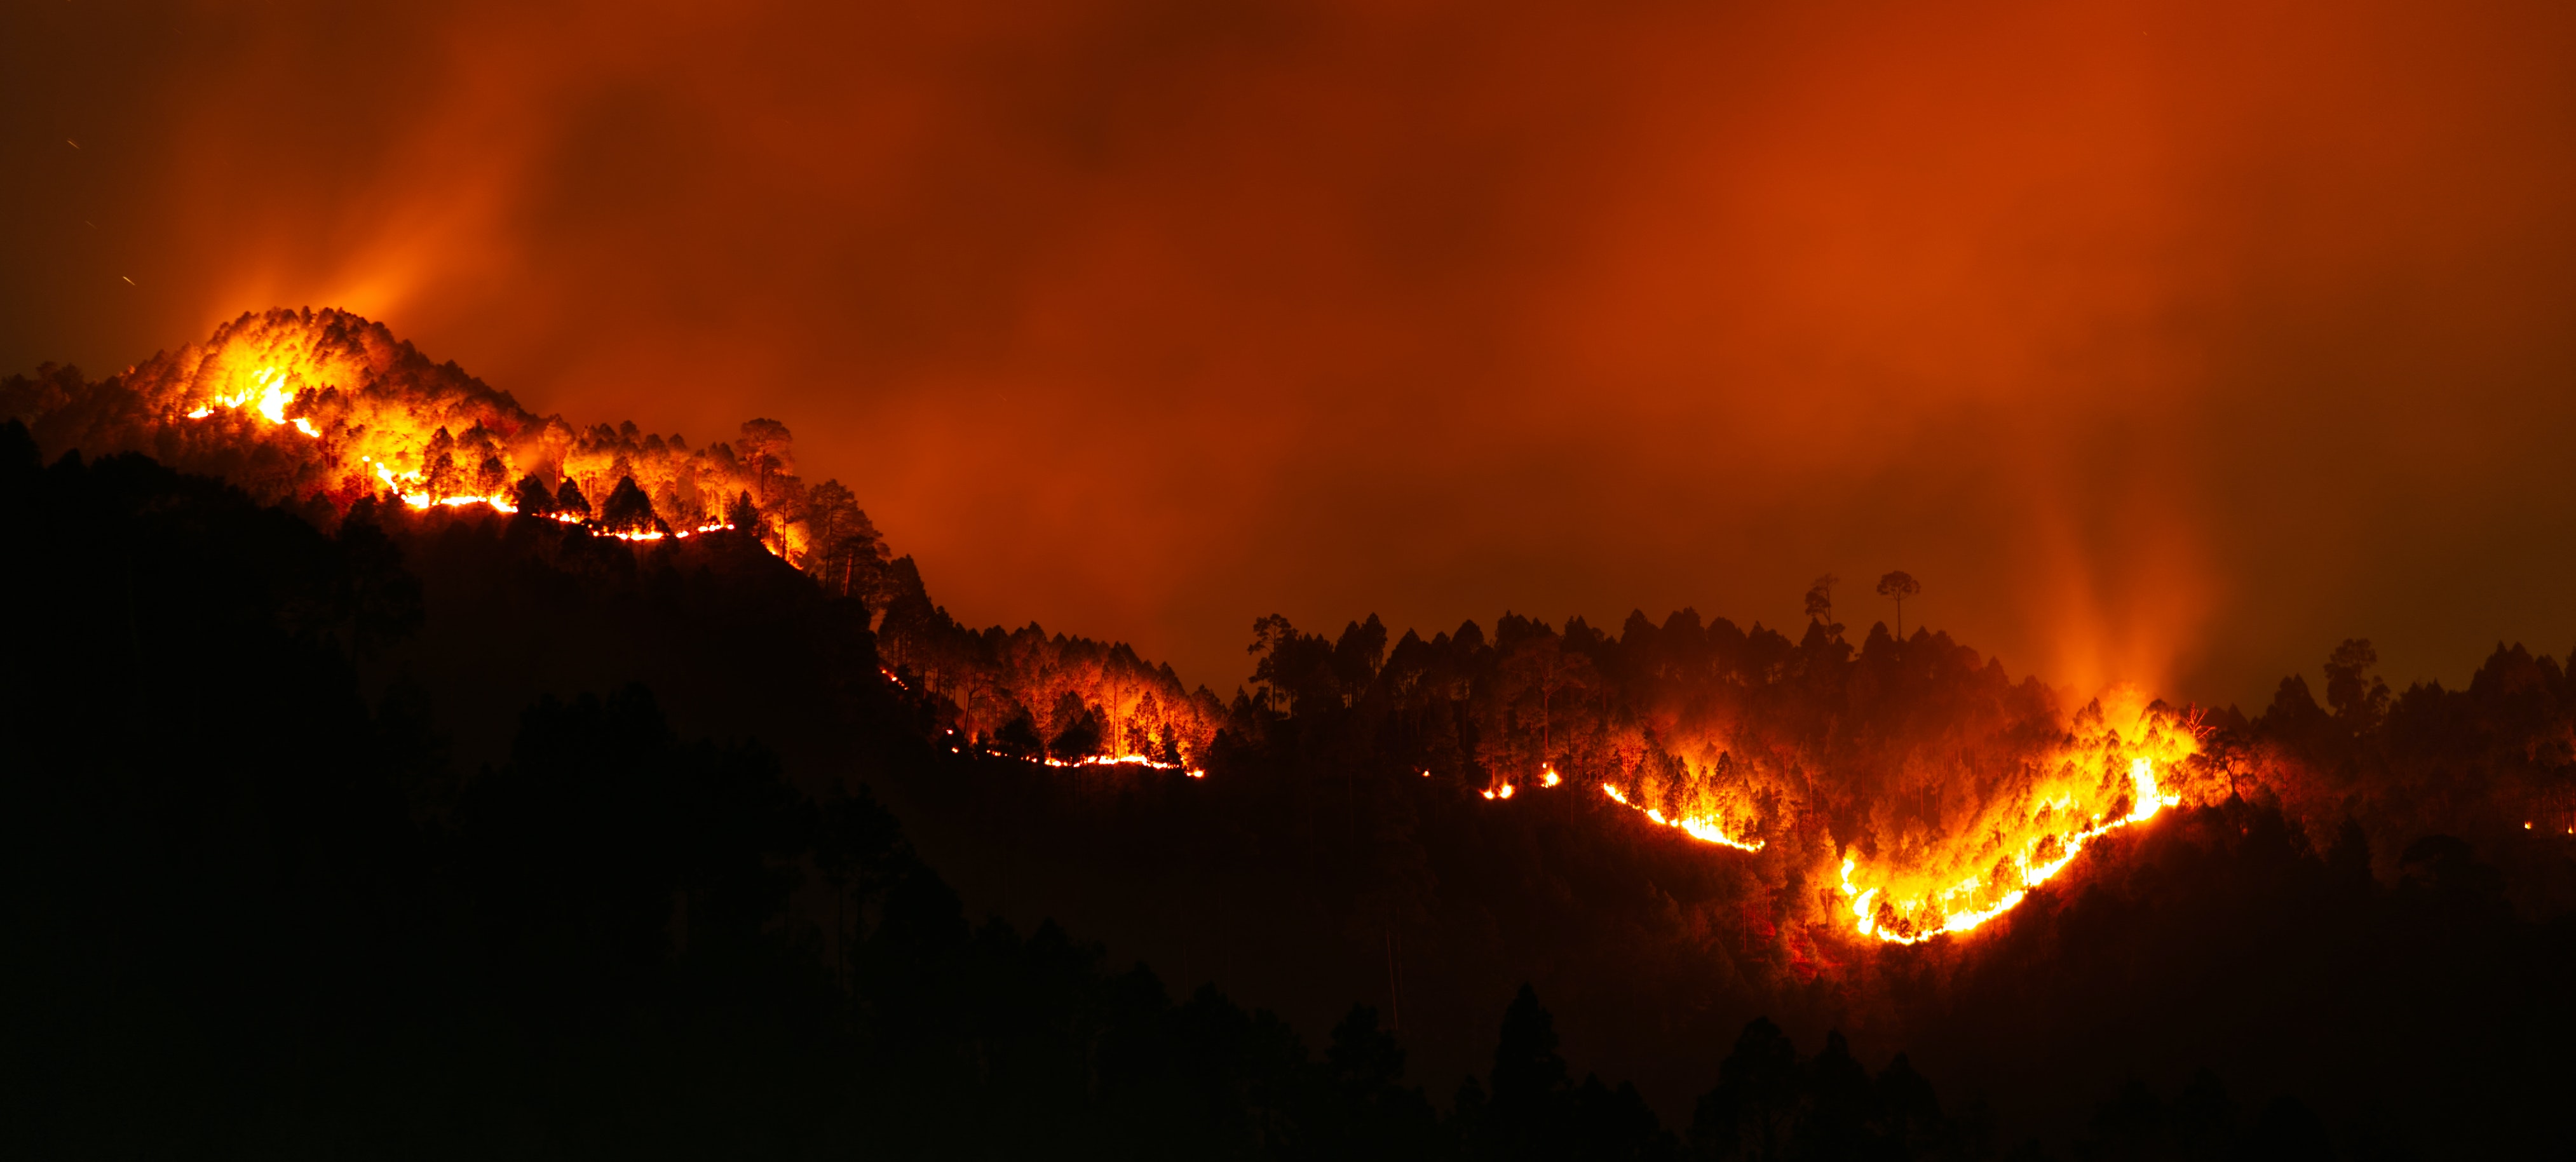 image for article The Fallout From Faraway Fires: Nine Alarming Facts About Wildfire Smoke